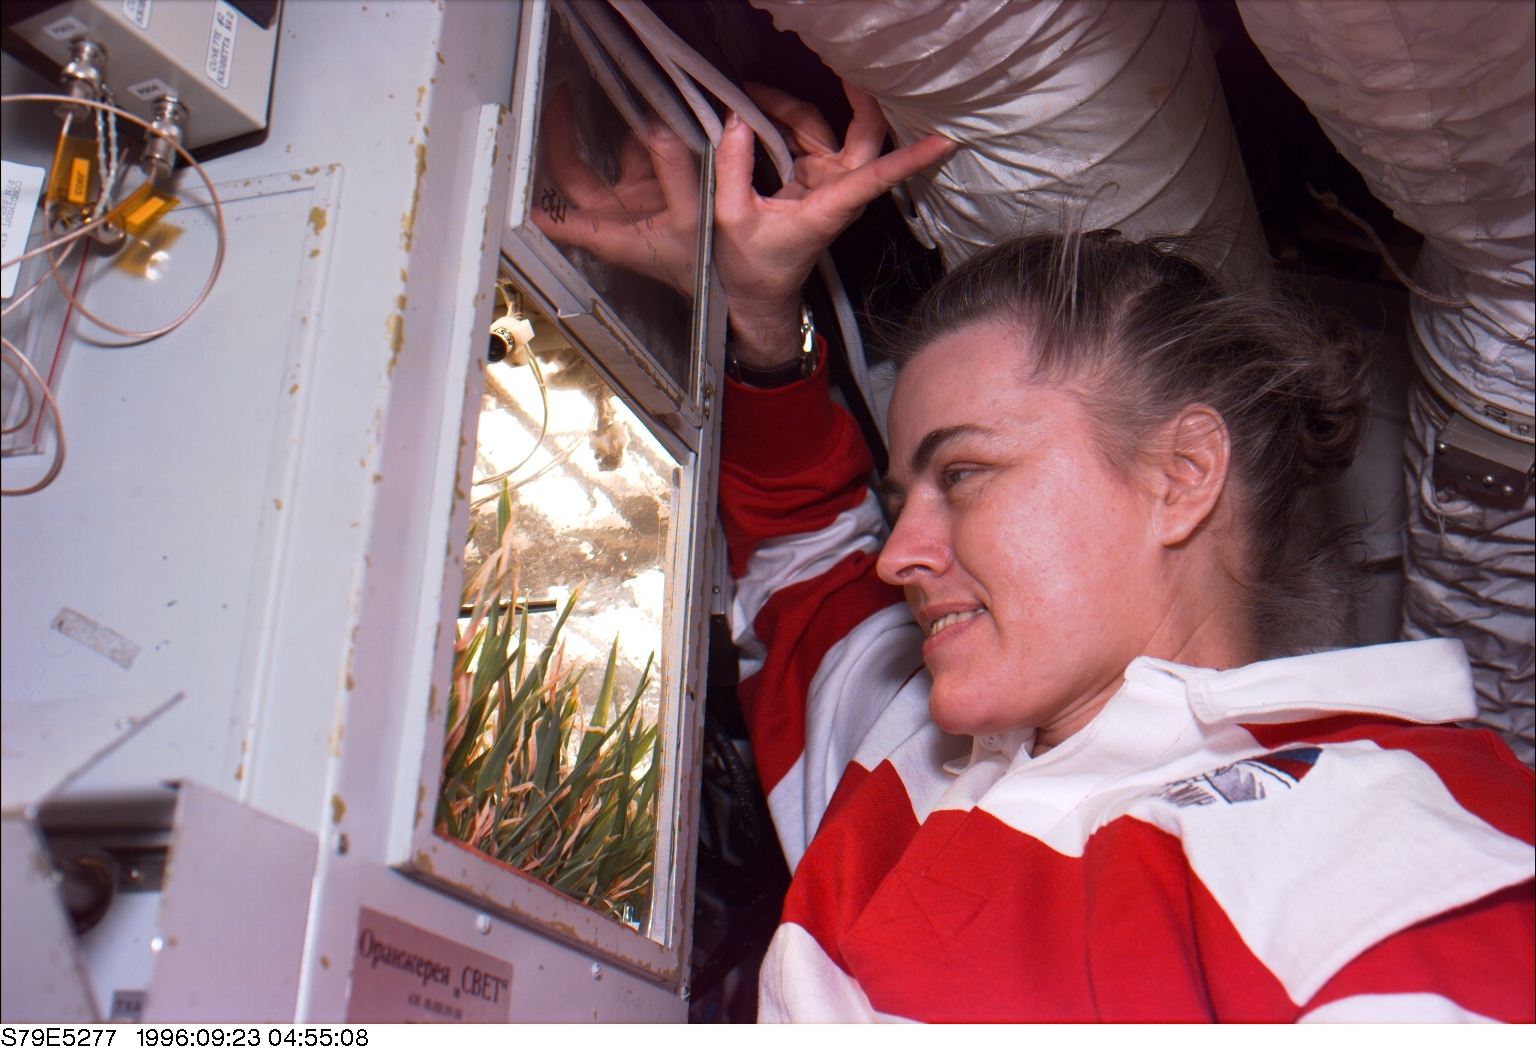 World record holder Lucid watches the growth of plants in a Russian greenhouse aboard Mir. This photograph was taken in September 1996, shortly after the crew of STS-79 - including Lucid's replacement, John Blaha - arrived to bring her home. Photo Credit: NASA